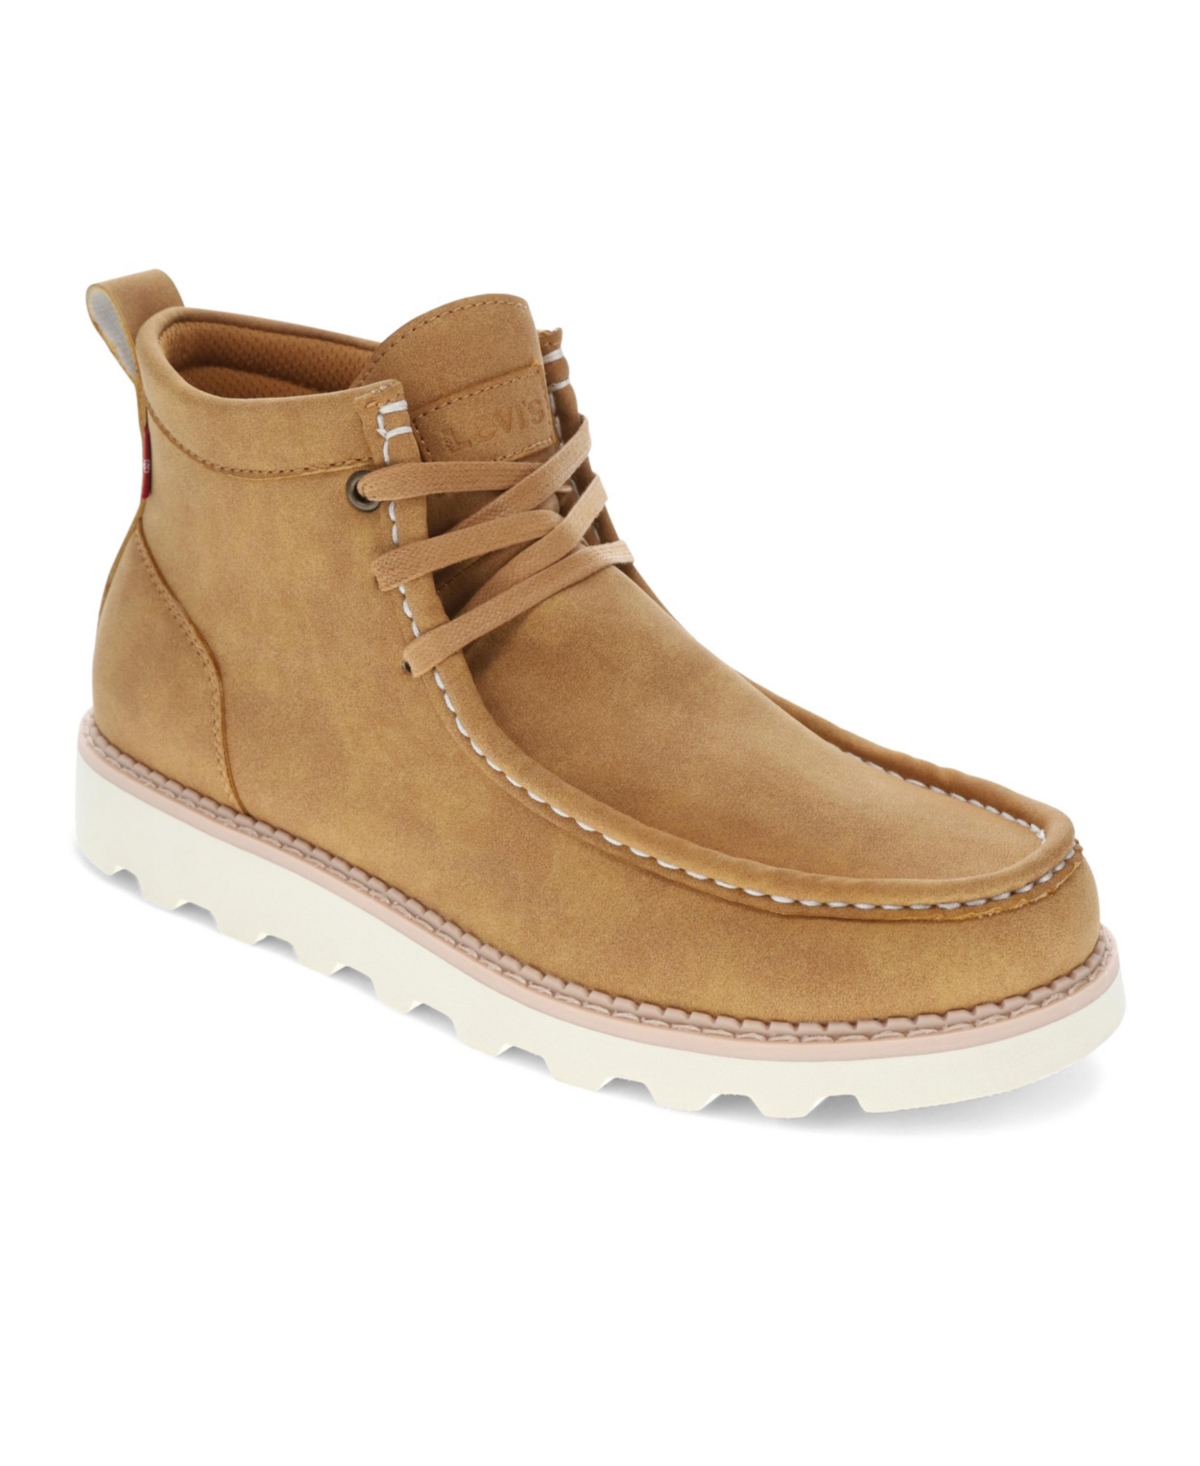 Men's Joshua Faux Leather Lace-Up Boots - Wheat